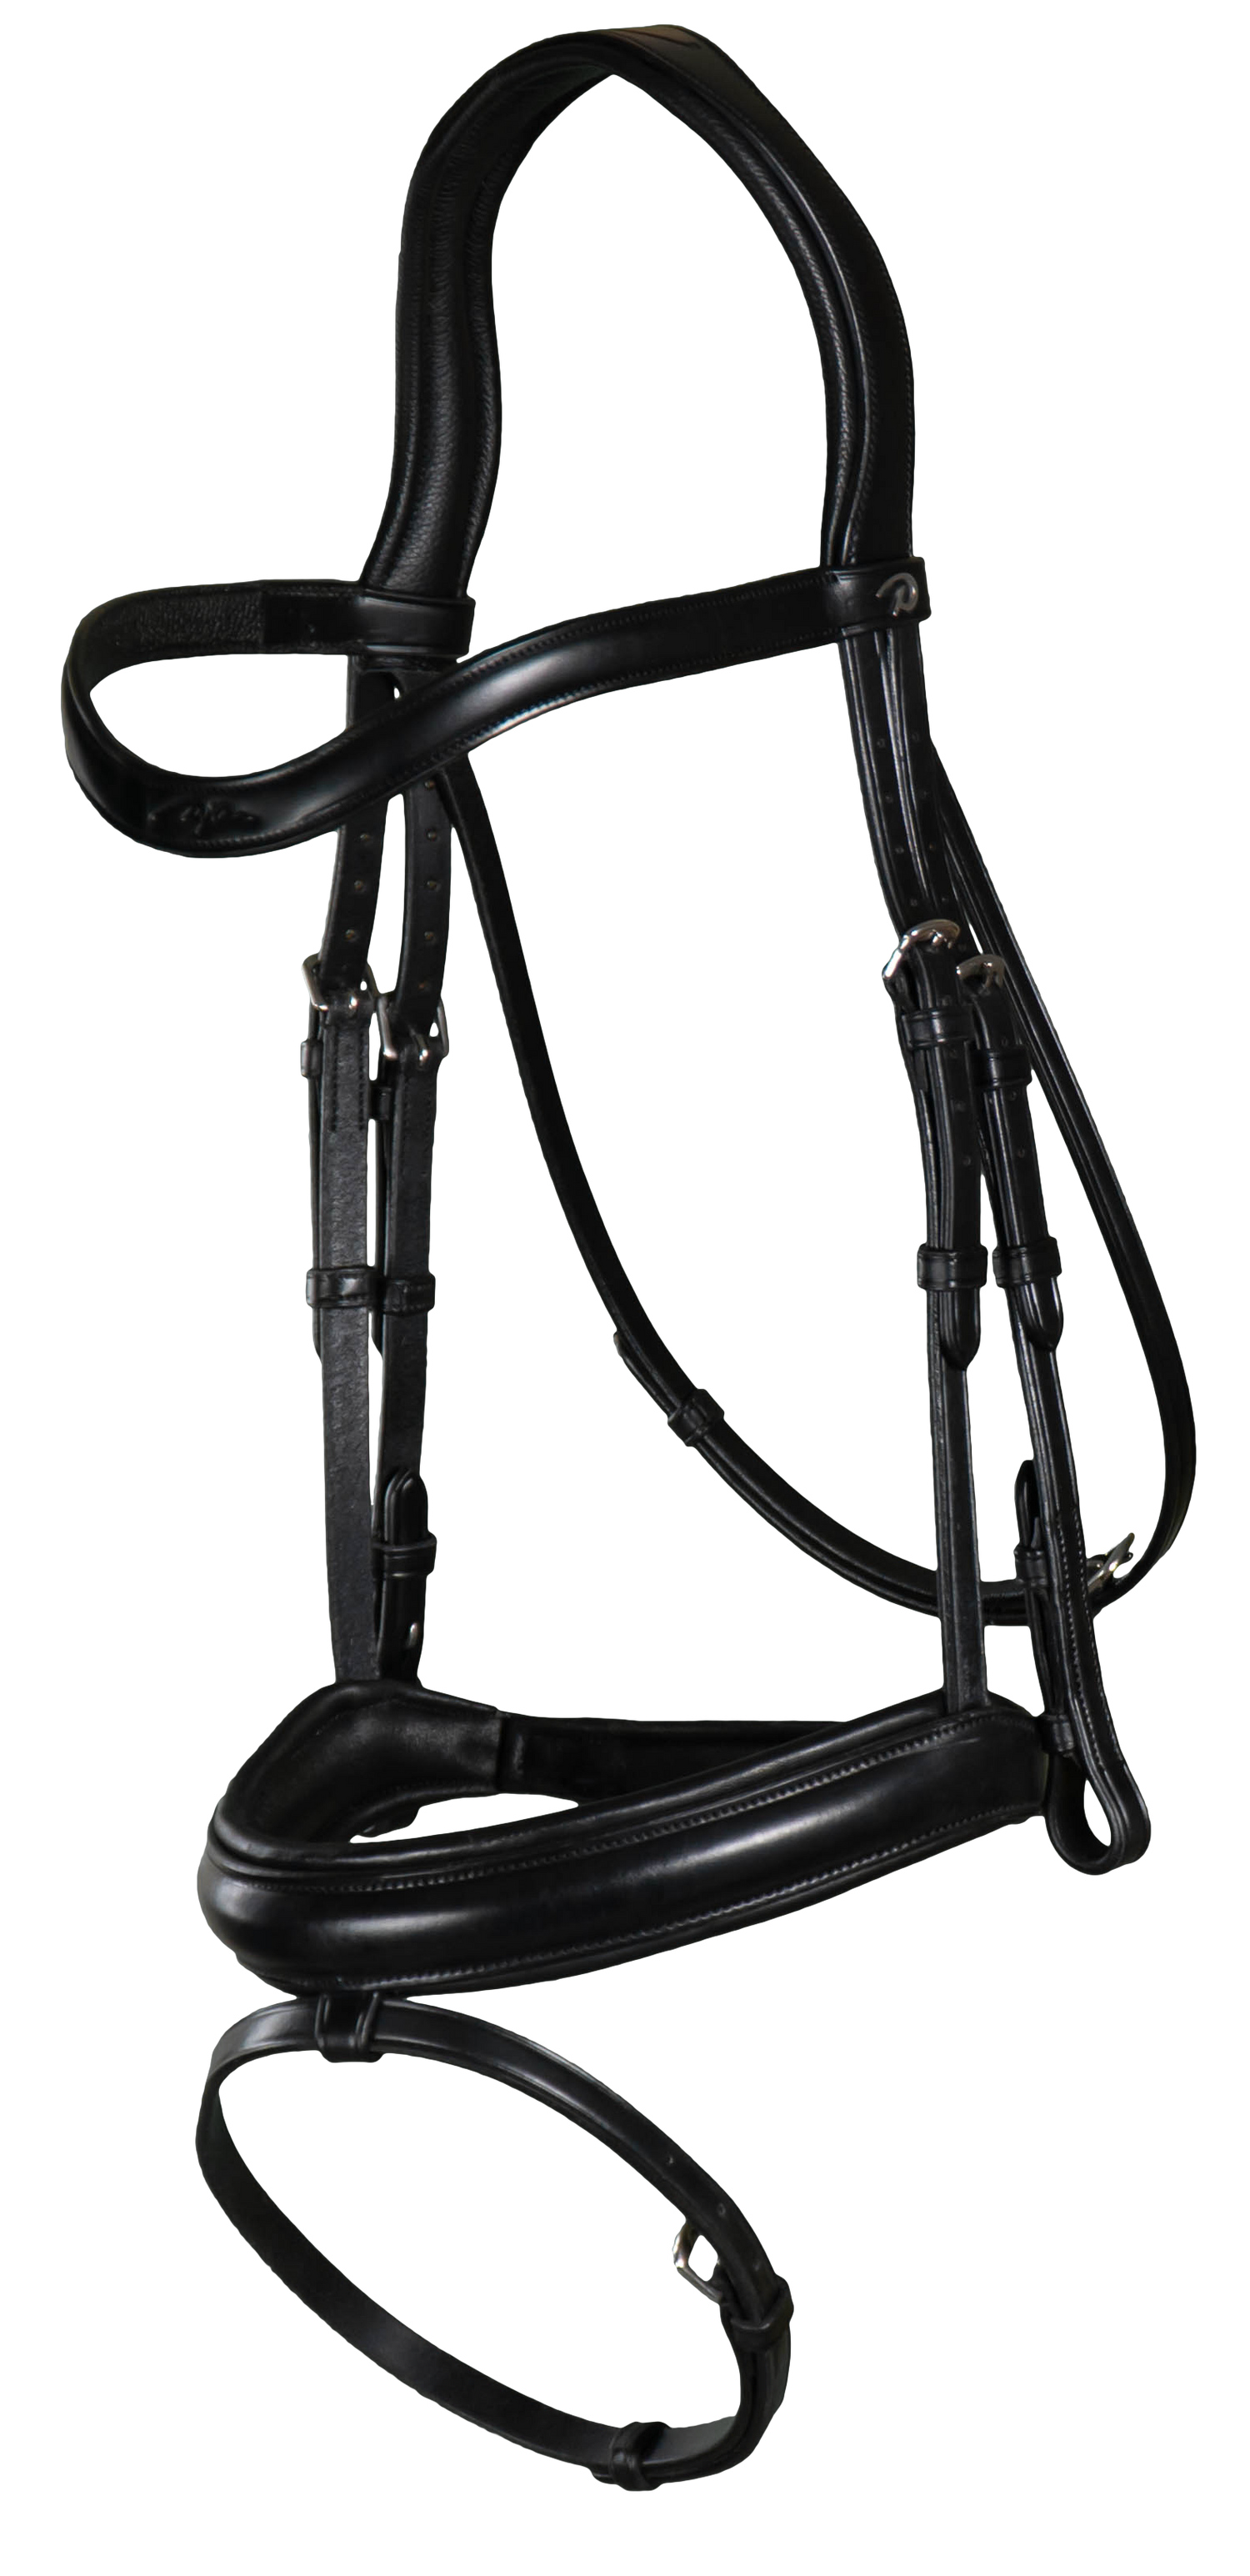 Dy'on New English Collection - Matte Medium Noseband Bridle with Flash - Black Full - Little Equine Co.